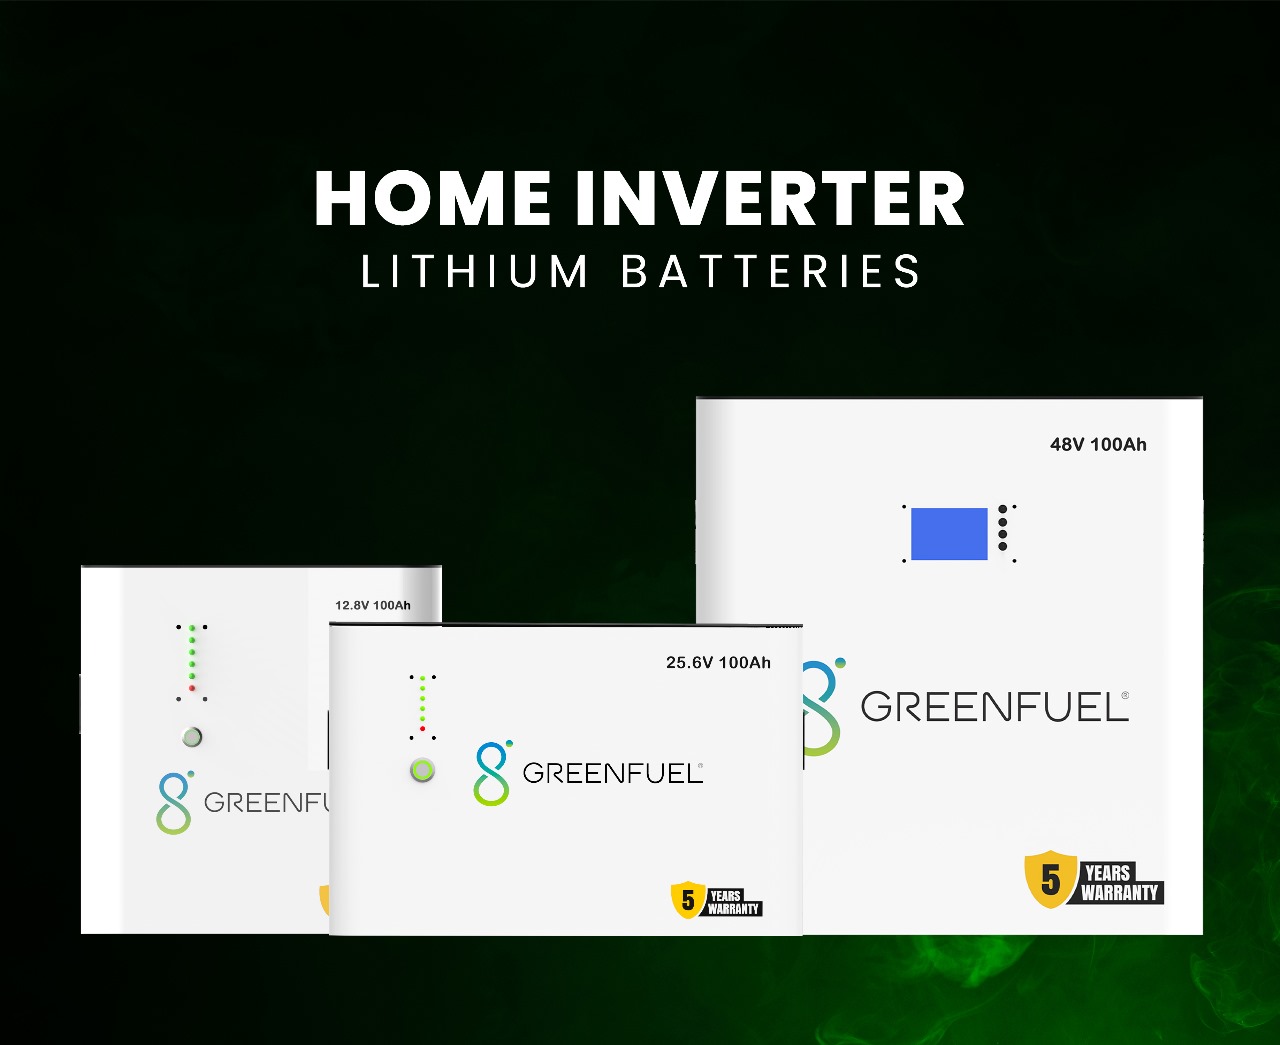 Greenfuel Energy launches revolutionary lithium Home Inverter batteries including a ‘stylish’ Wall-Mount design